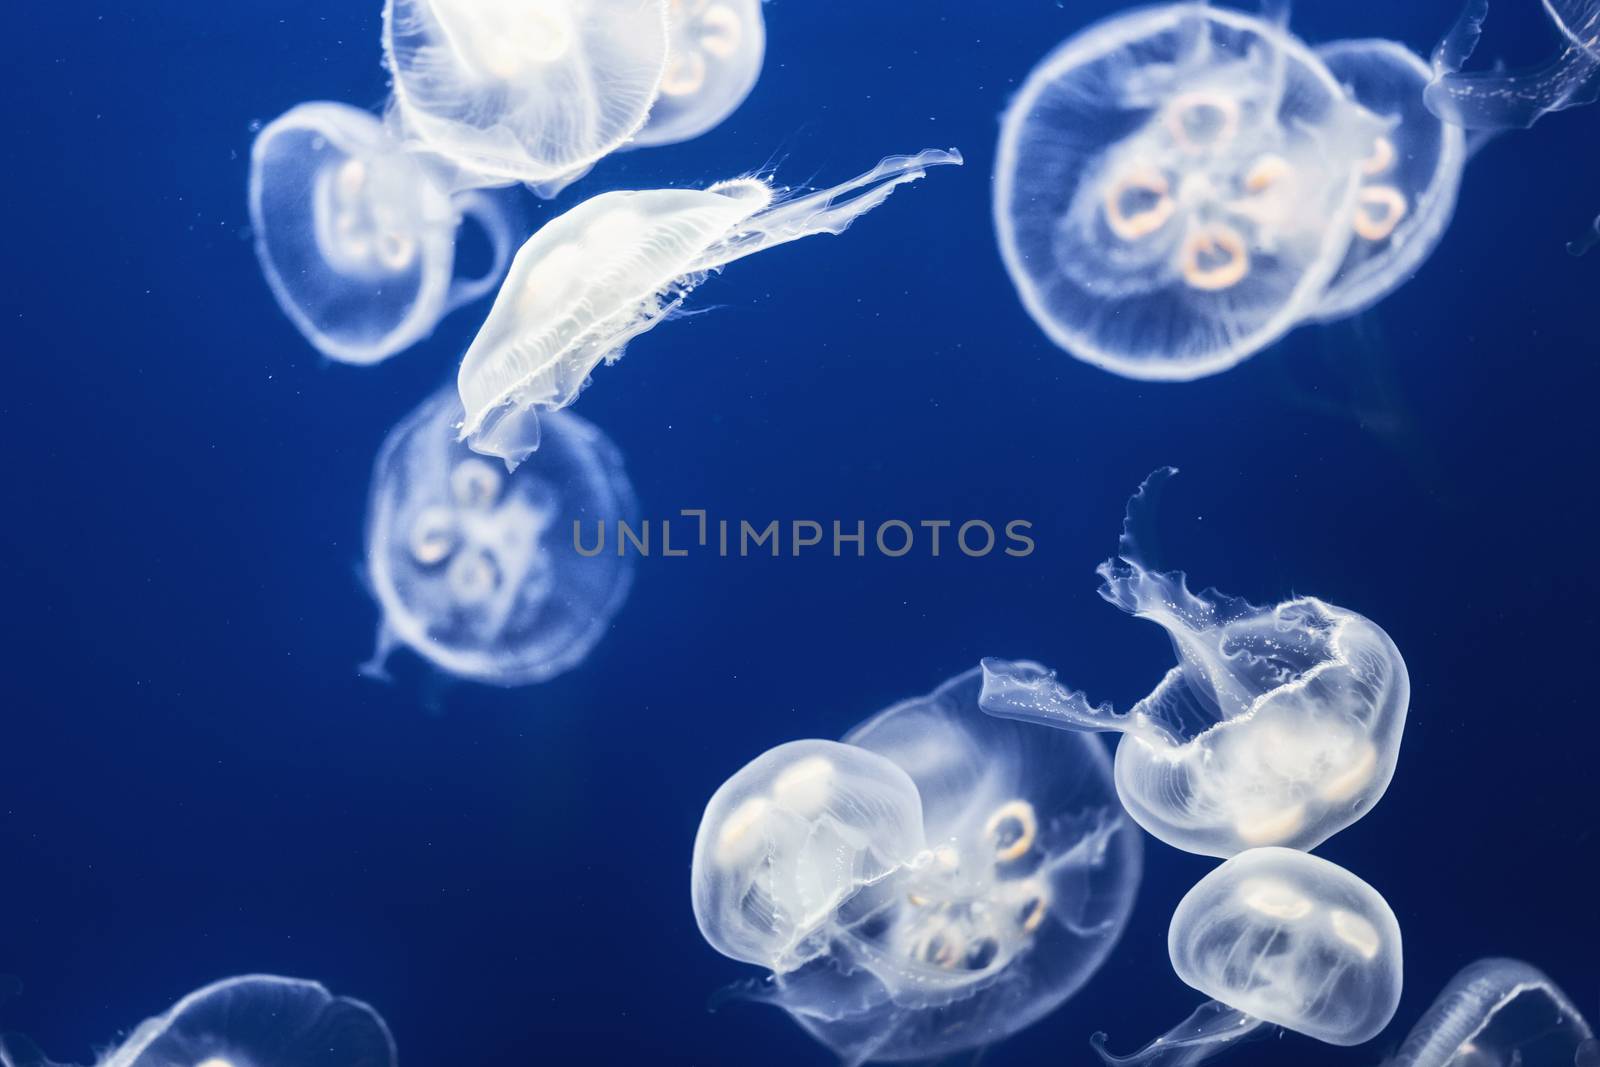 Large amount of jelly fish floating in deep blue water